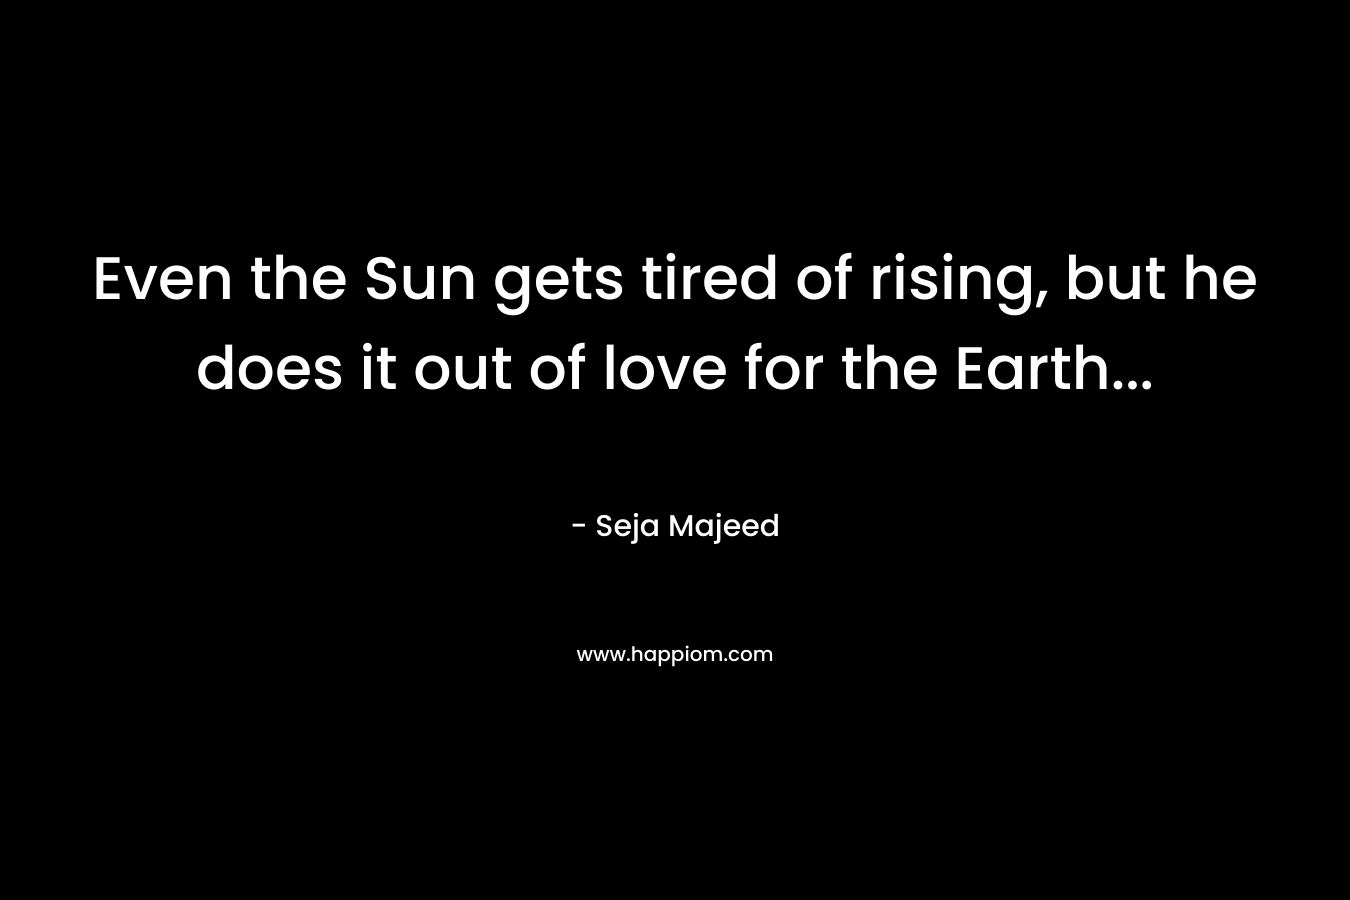 Even the Sun gets tired of rising, but he does it out of love for the Earth...